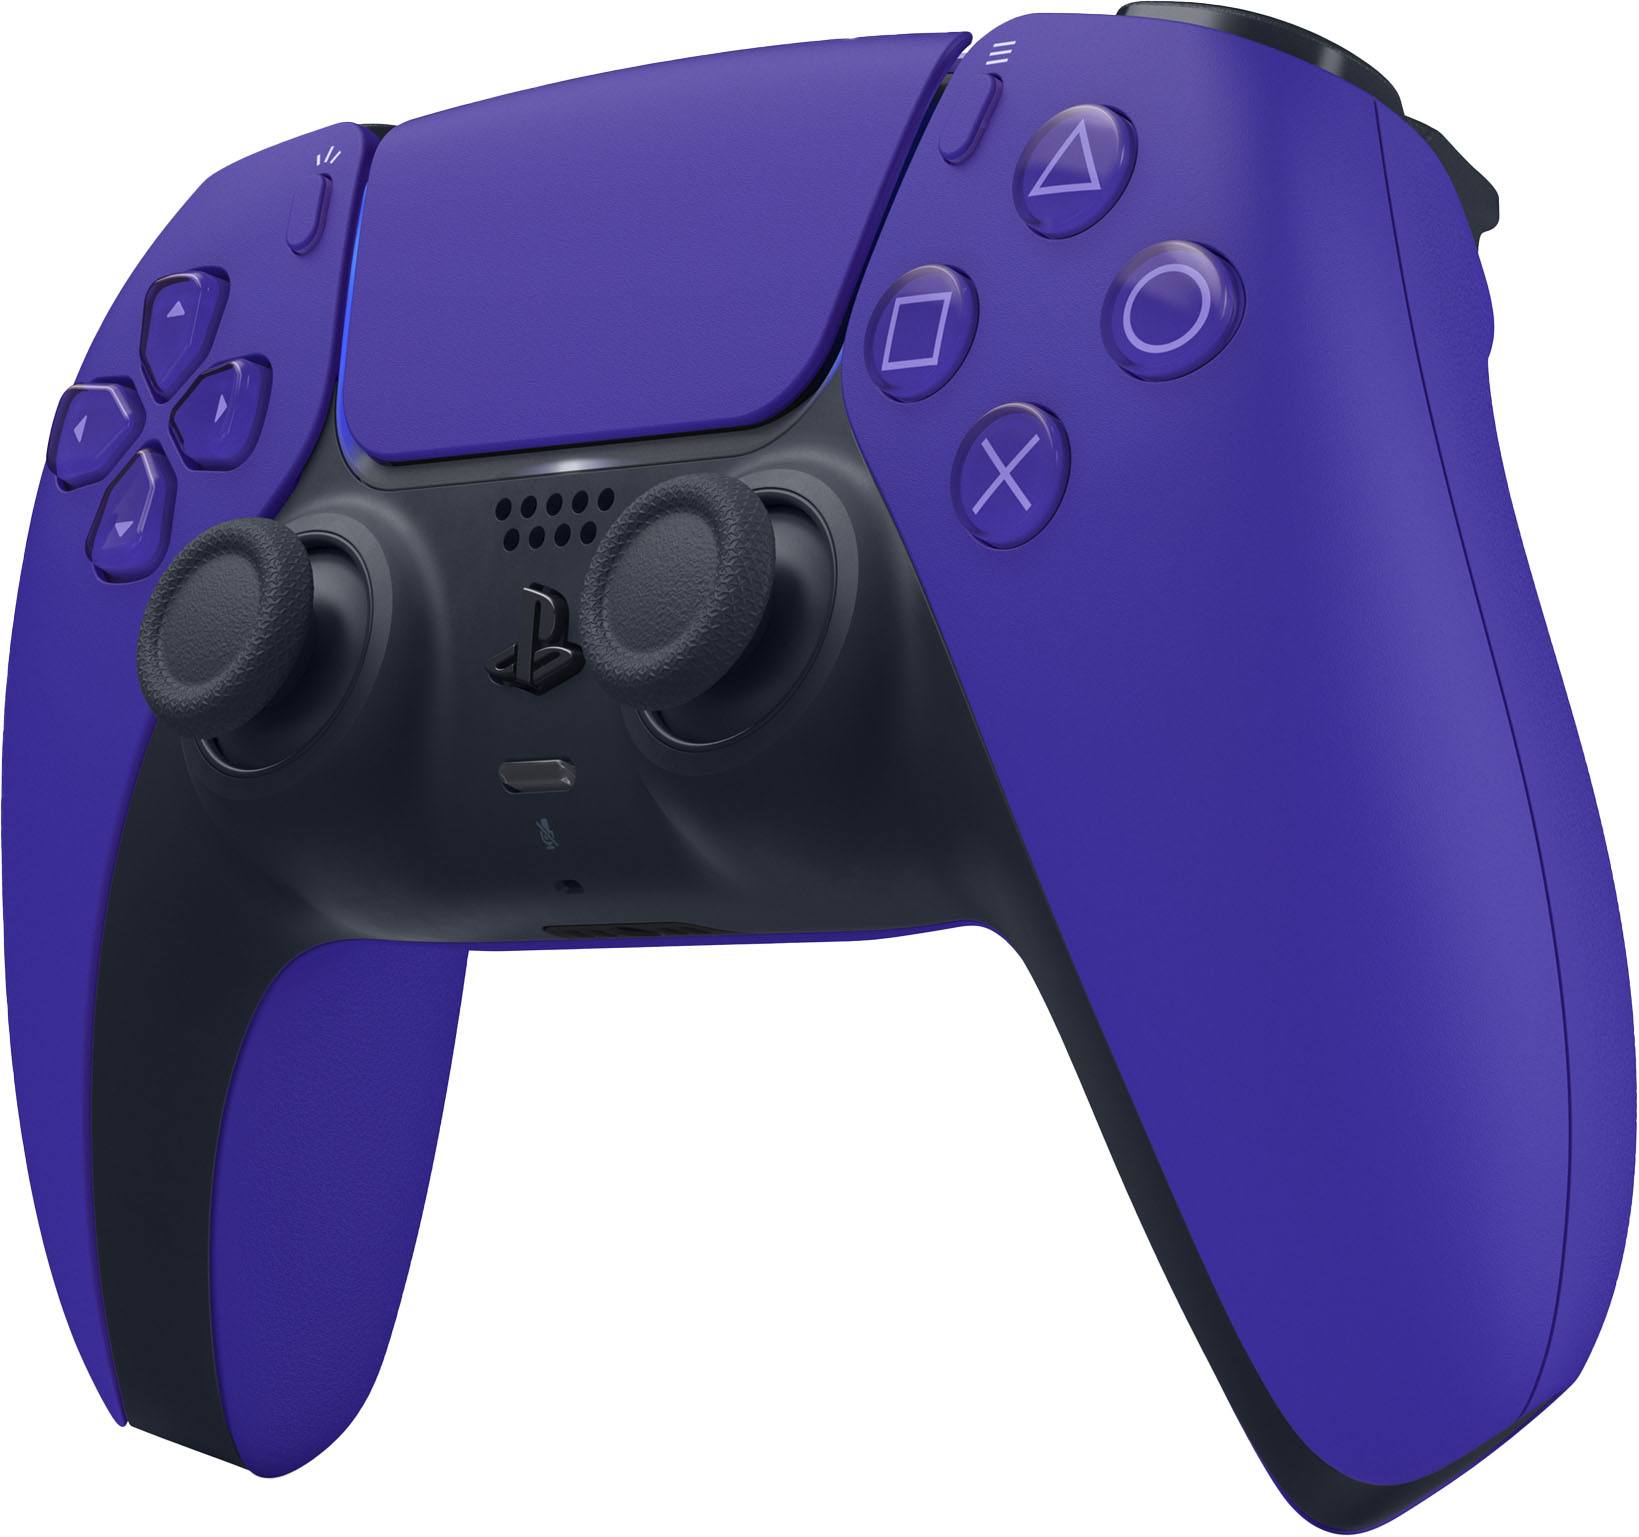 Angle View: Sony - PlayStation 5 - DualSense Wireless Controller - Galactic Purple